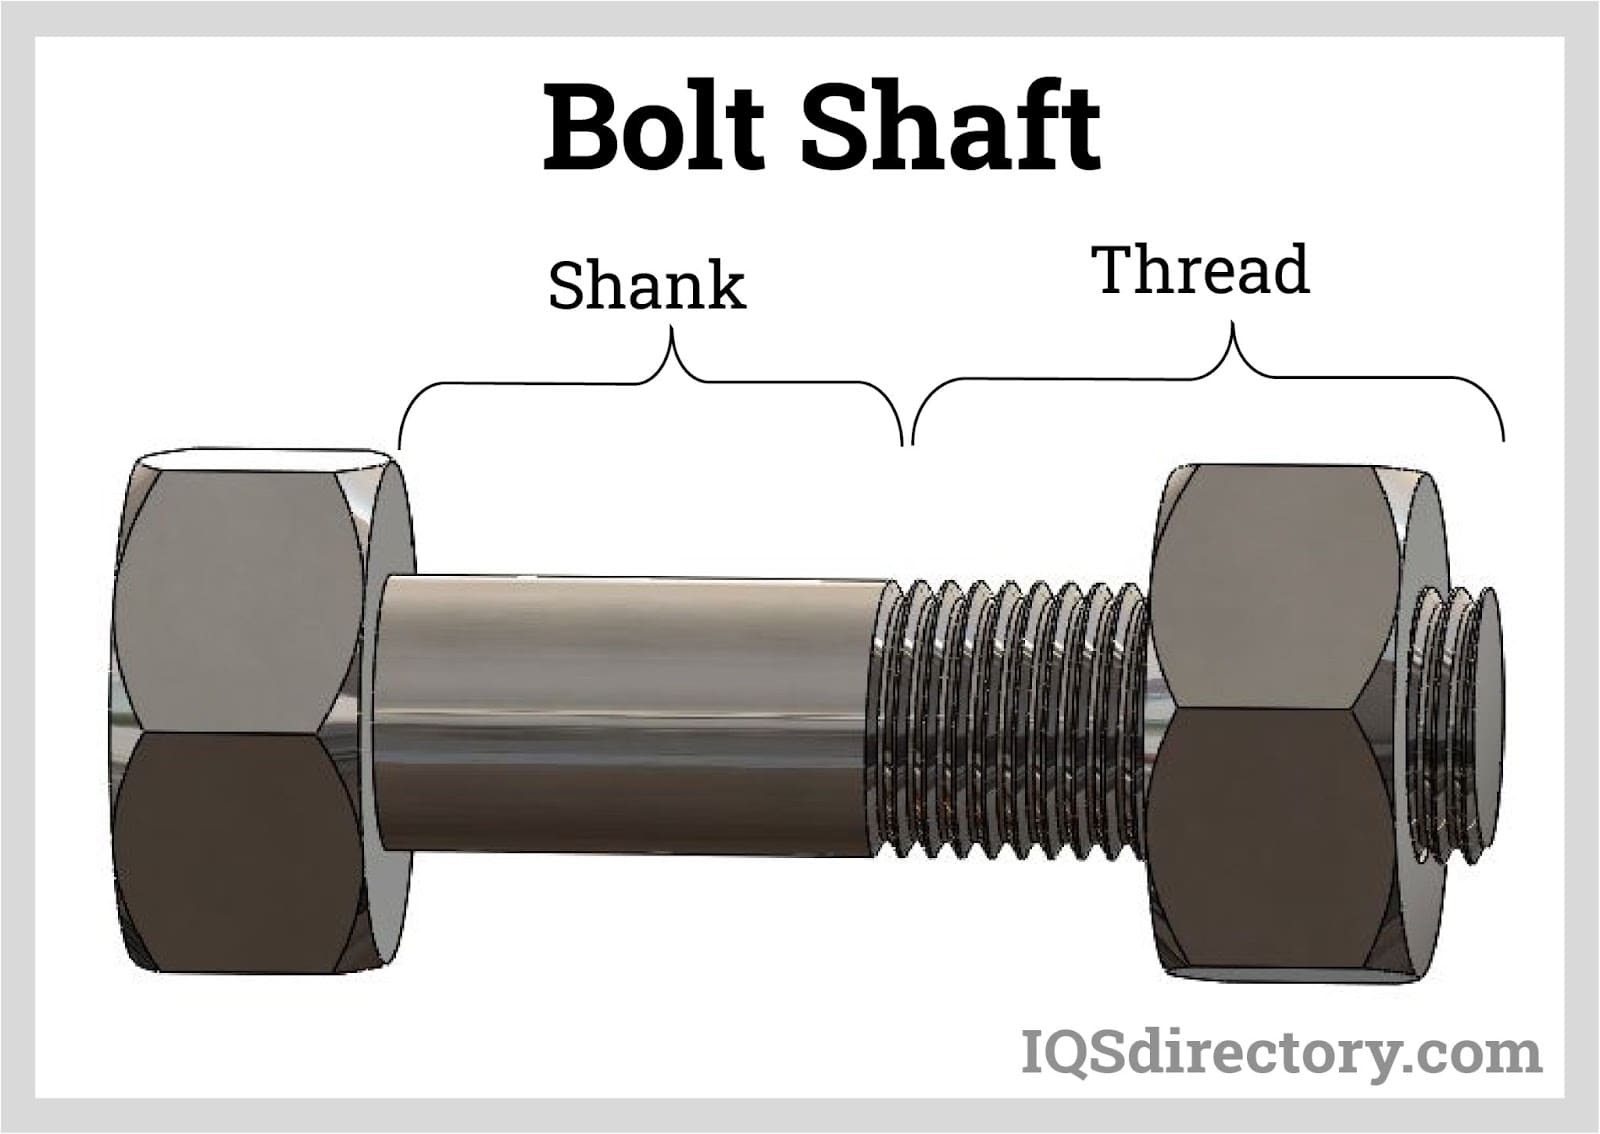 Types And Shapes Of Fasteners, Nuts, Screw Head, And washers